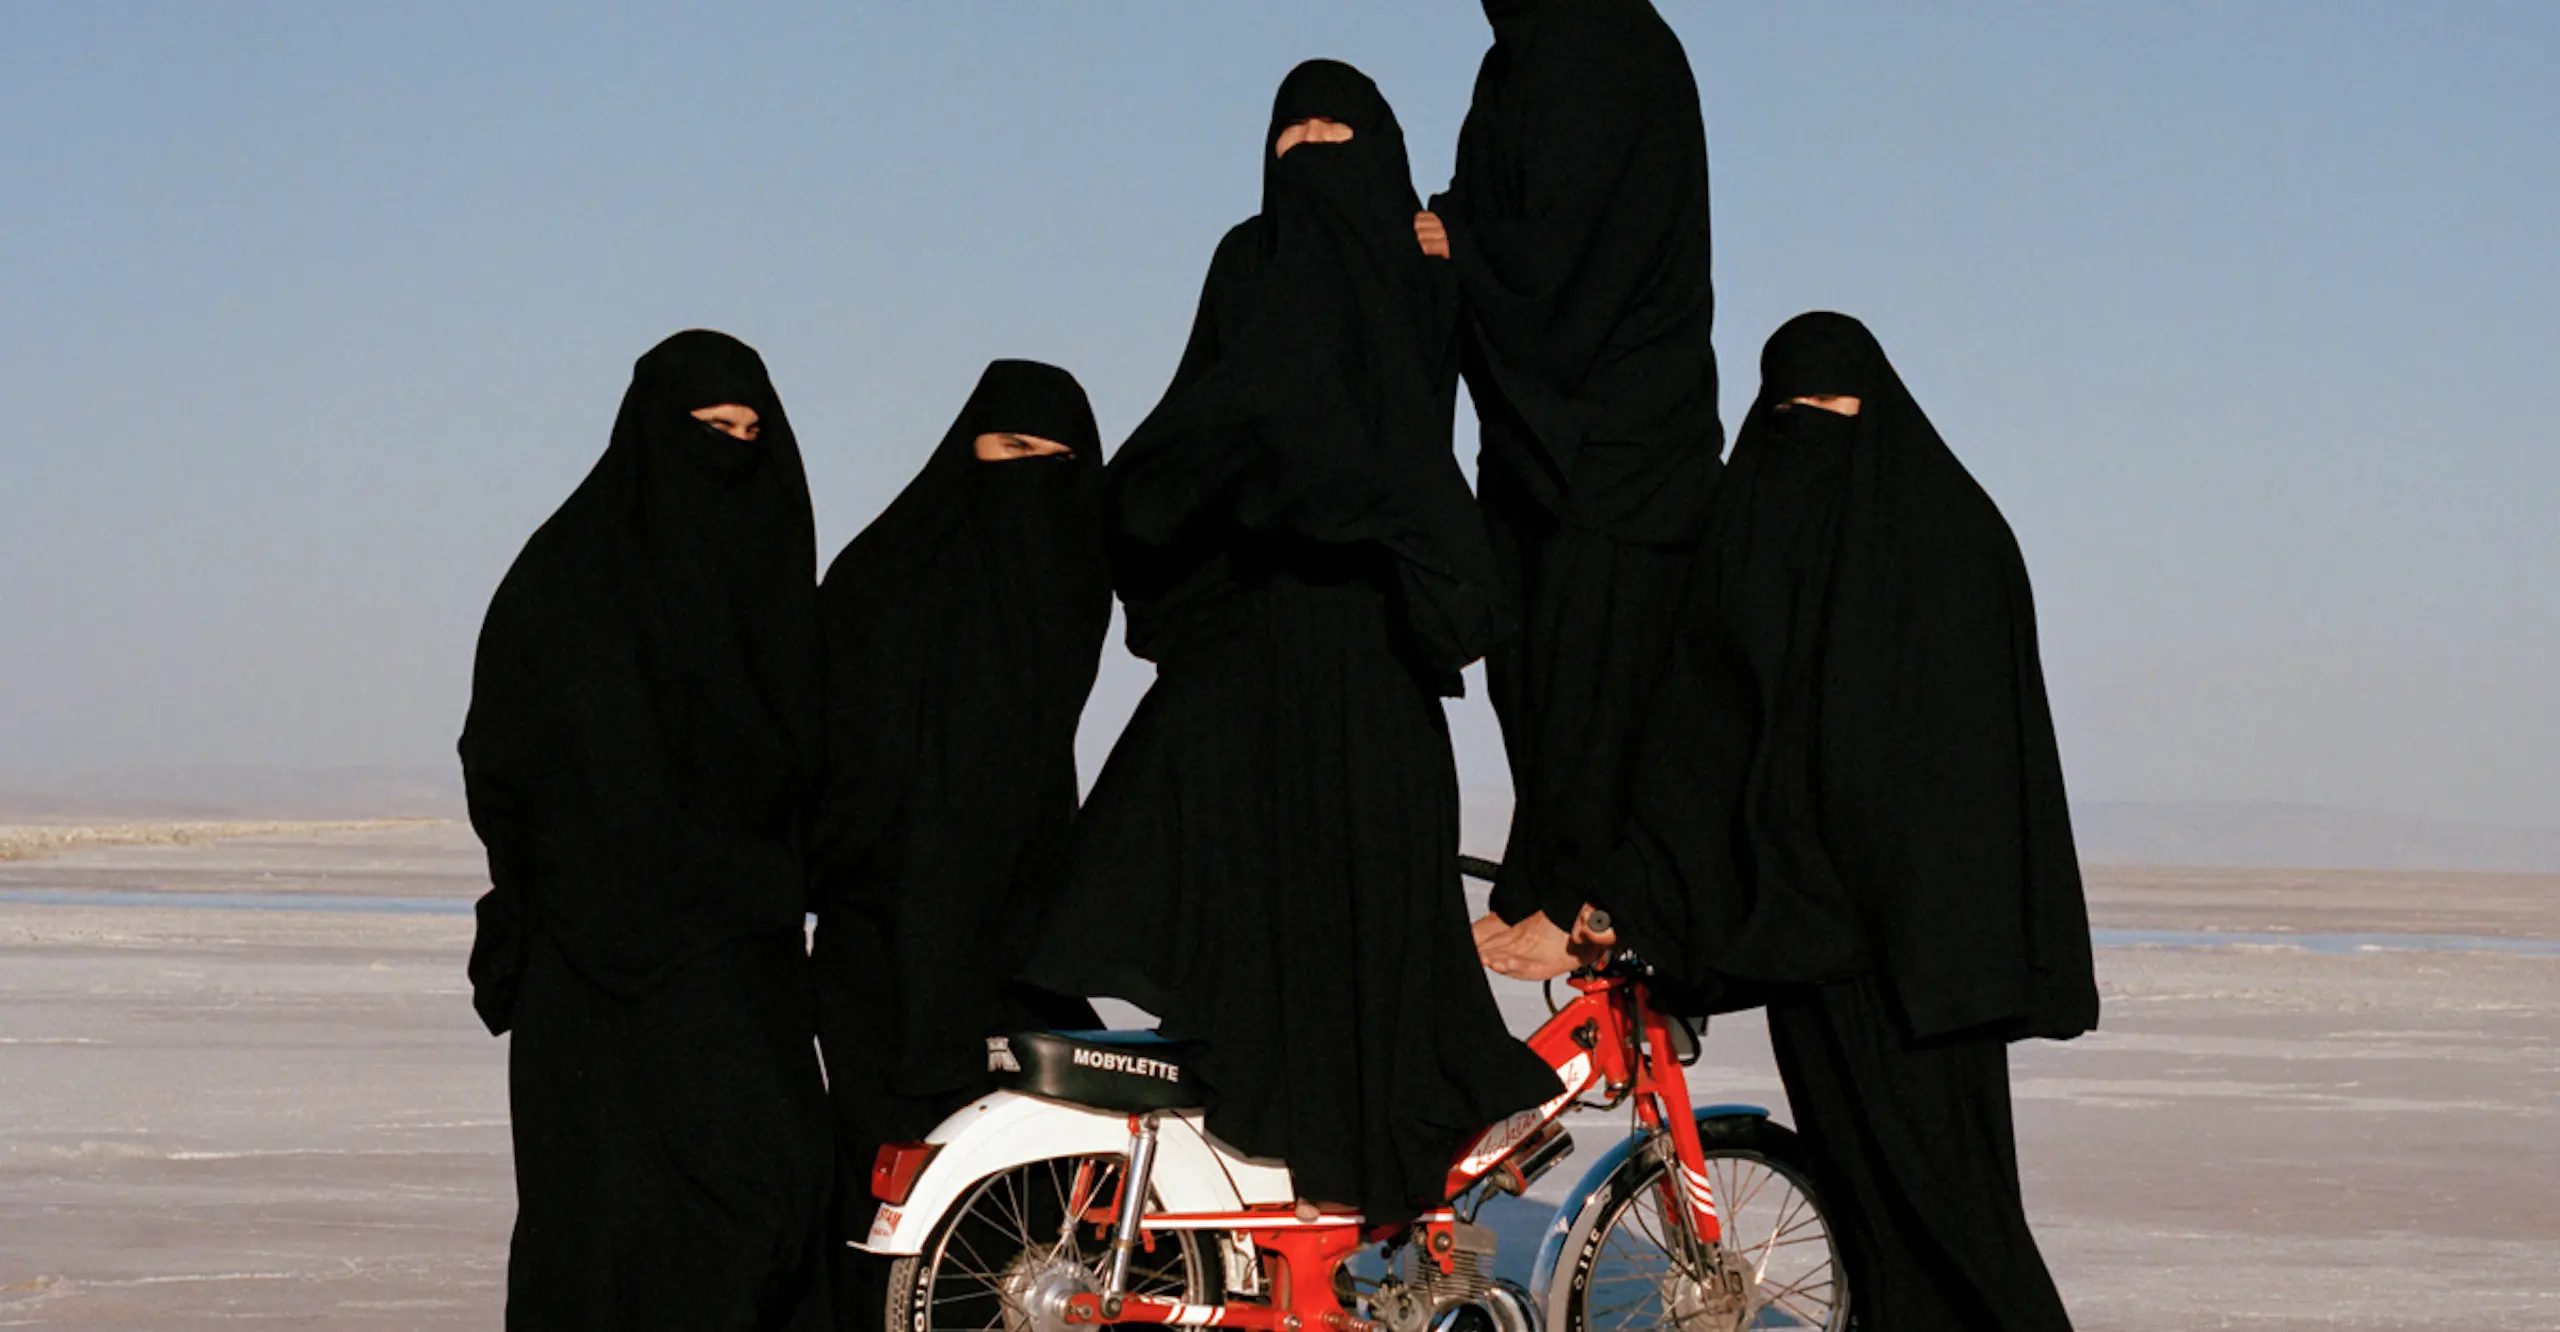 Five figures dressed in black hijabs stand in the desert with two balanced on a motor scooter.